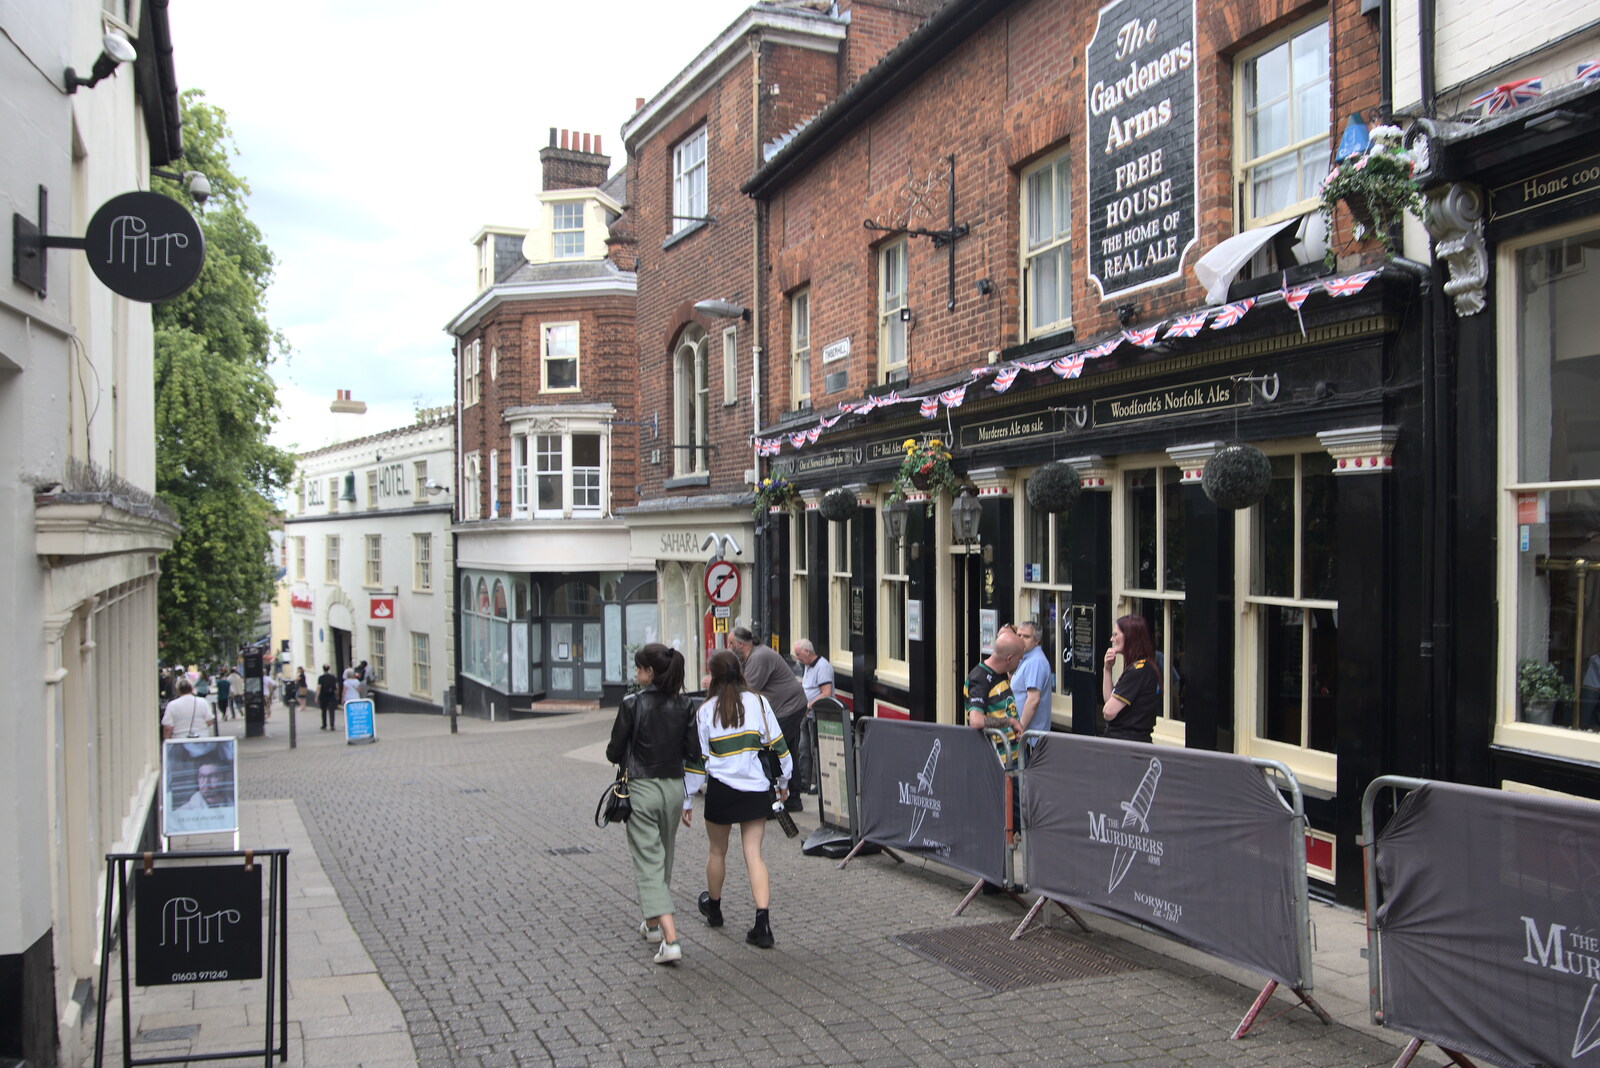 Outside the Gardeners Arms, and the Murderers from The Lord Mayor's Procession, Norwich, Norfolk - 2nd July 2022